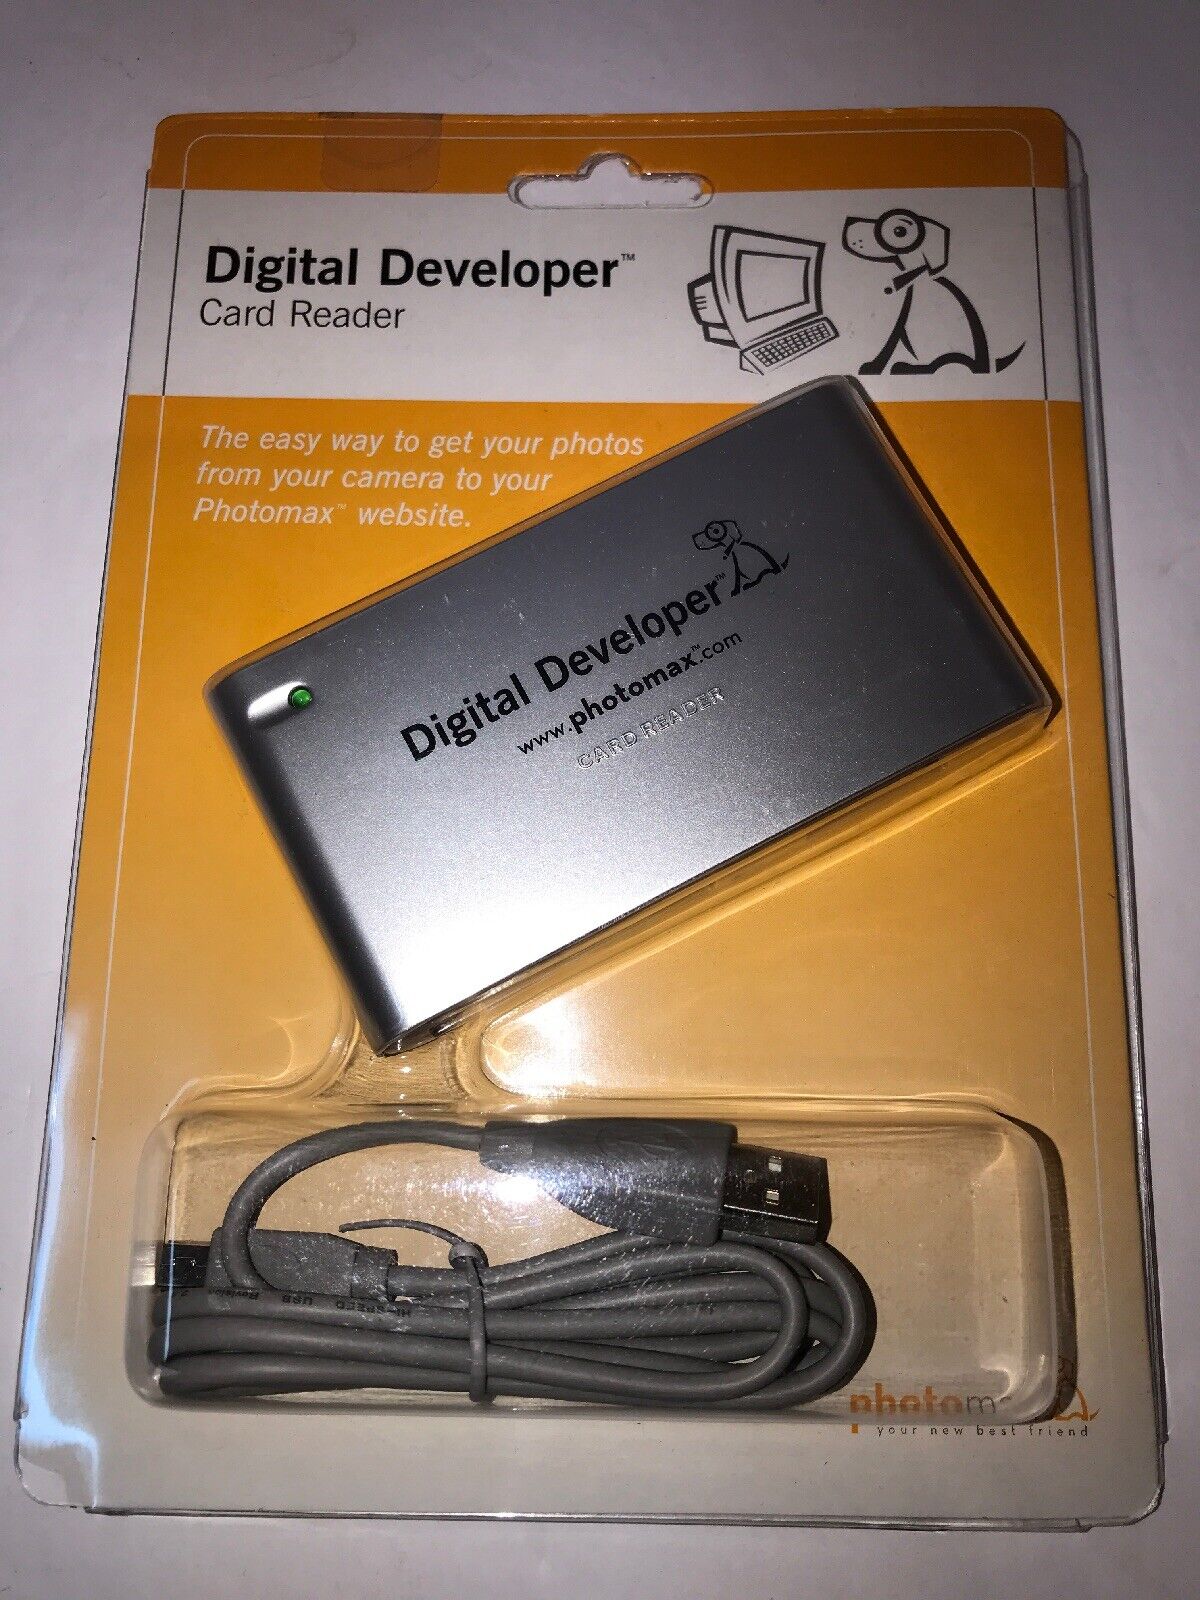 Digital Developer Card Reader With install CD Enclosed By Photomax